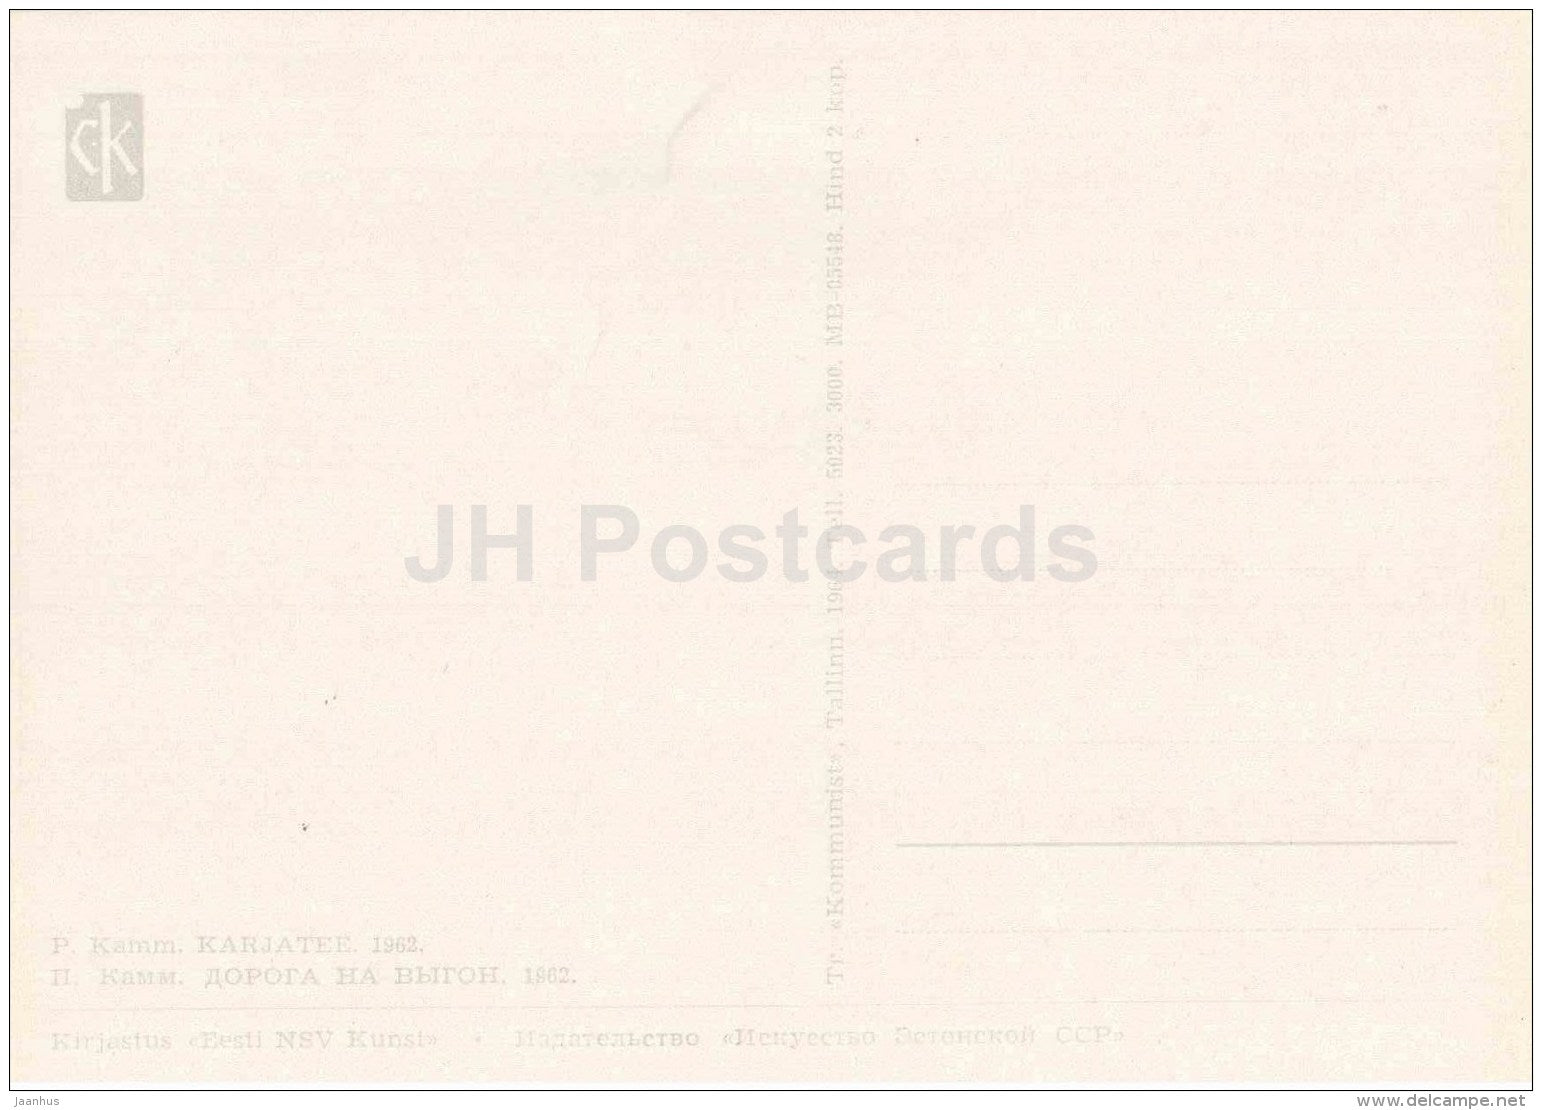 drawing by Paul Kamm - The road to the pasture , 1962 - 1964 - Estonia USSR - unused - JH Postcards